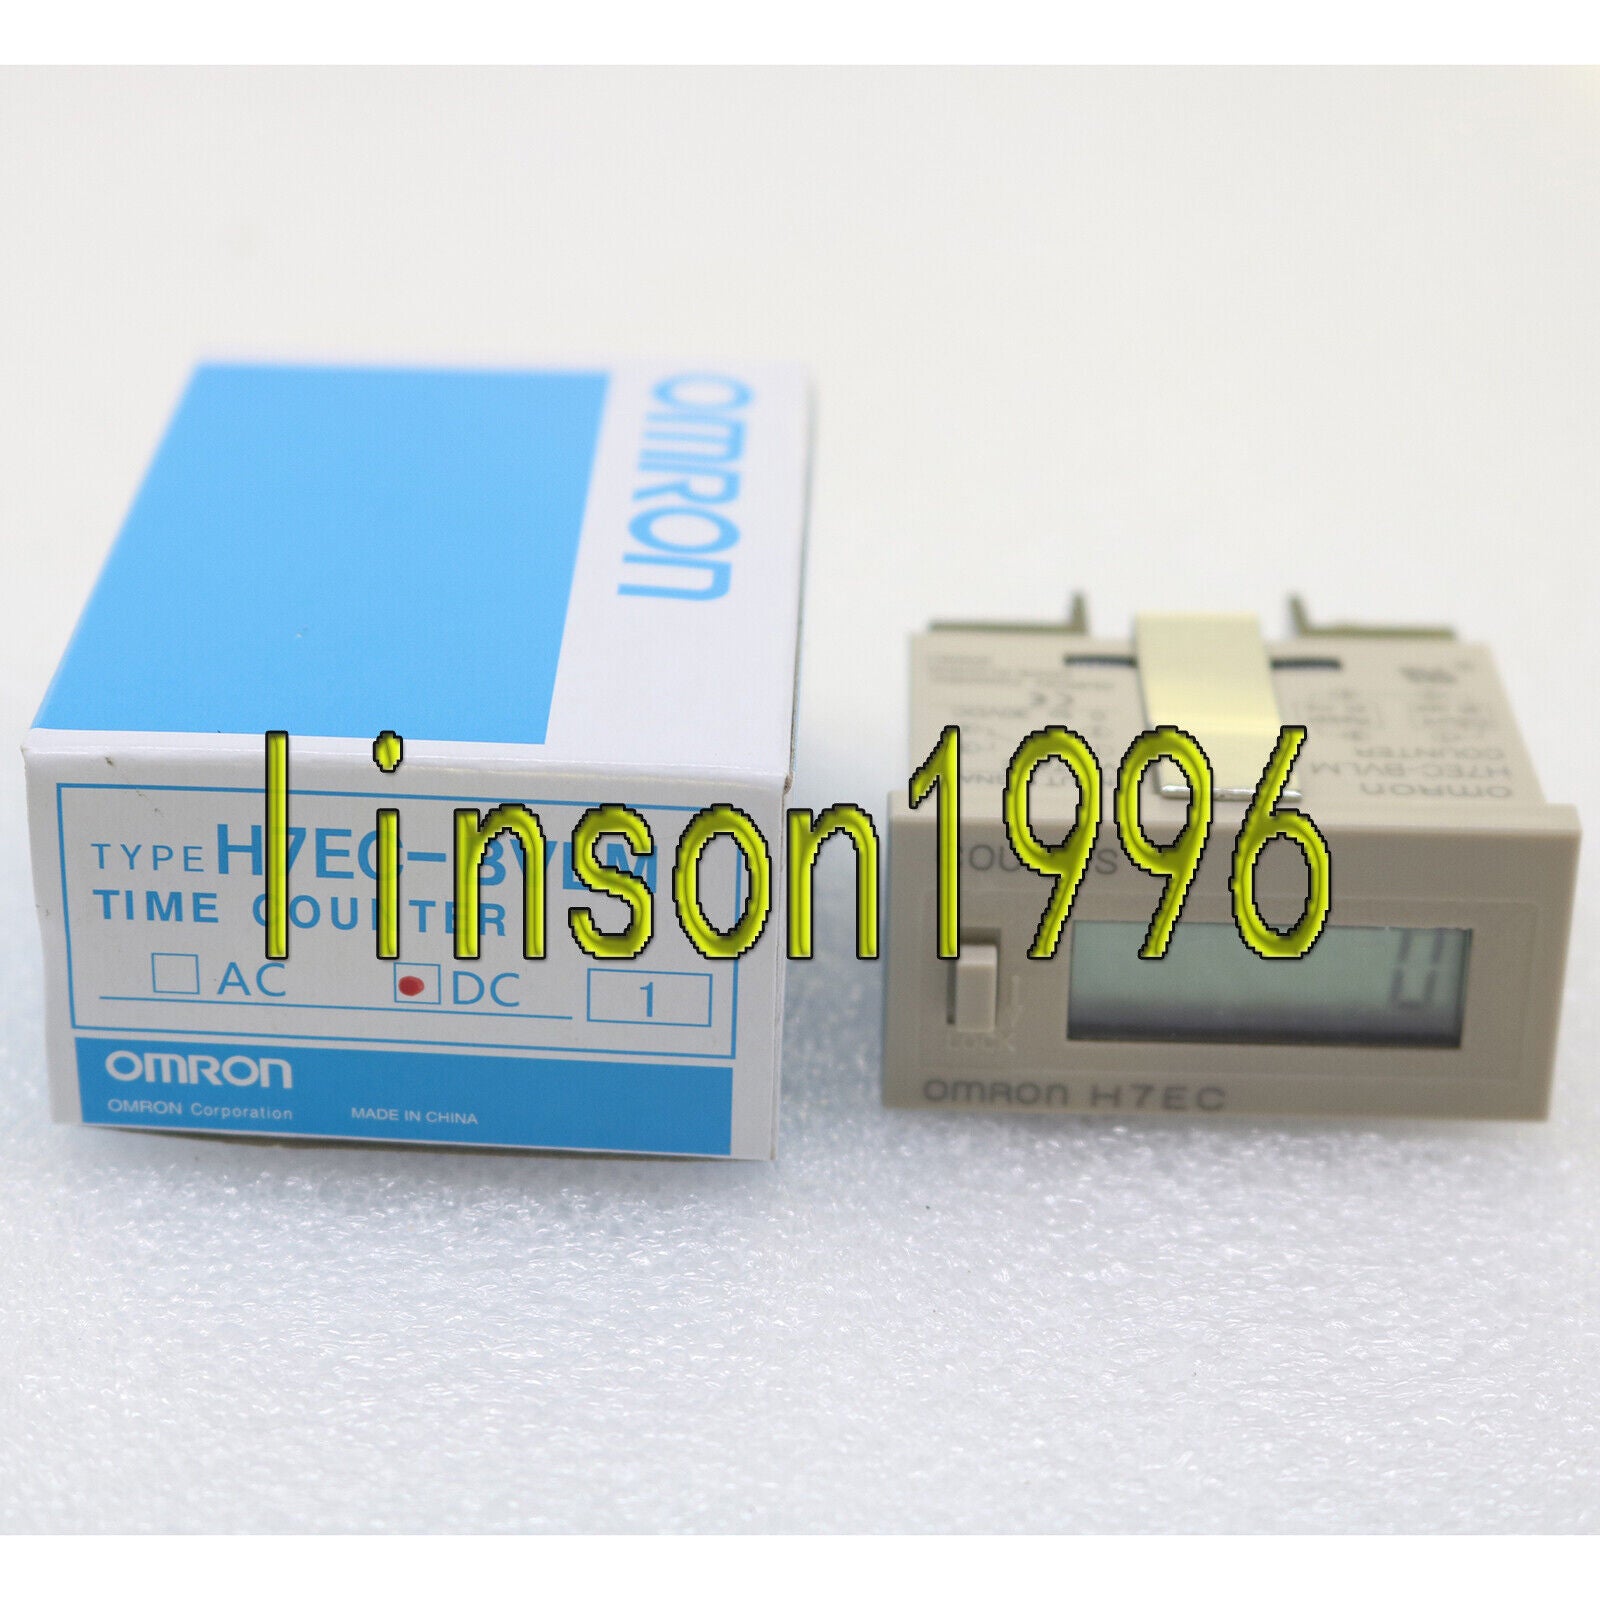 new 10pc H7EC-BVLM H7EC BVLM DC5-30V  Omron Counter Totalizer